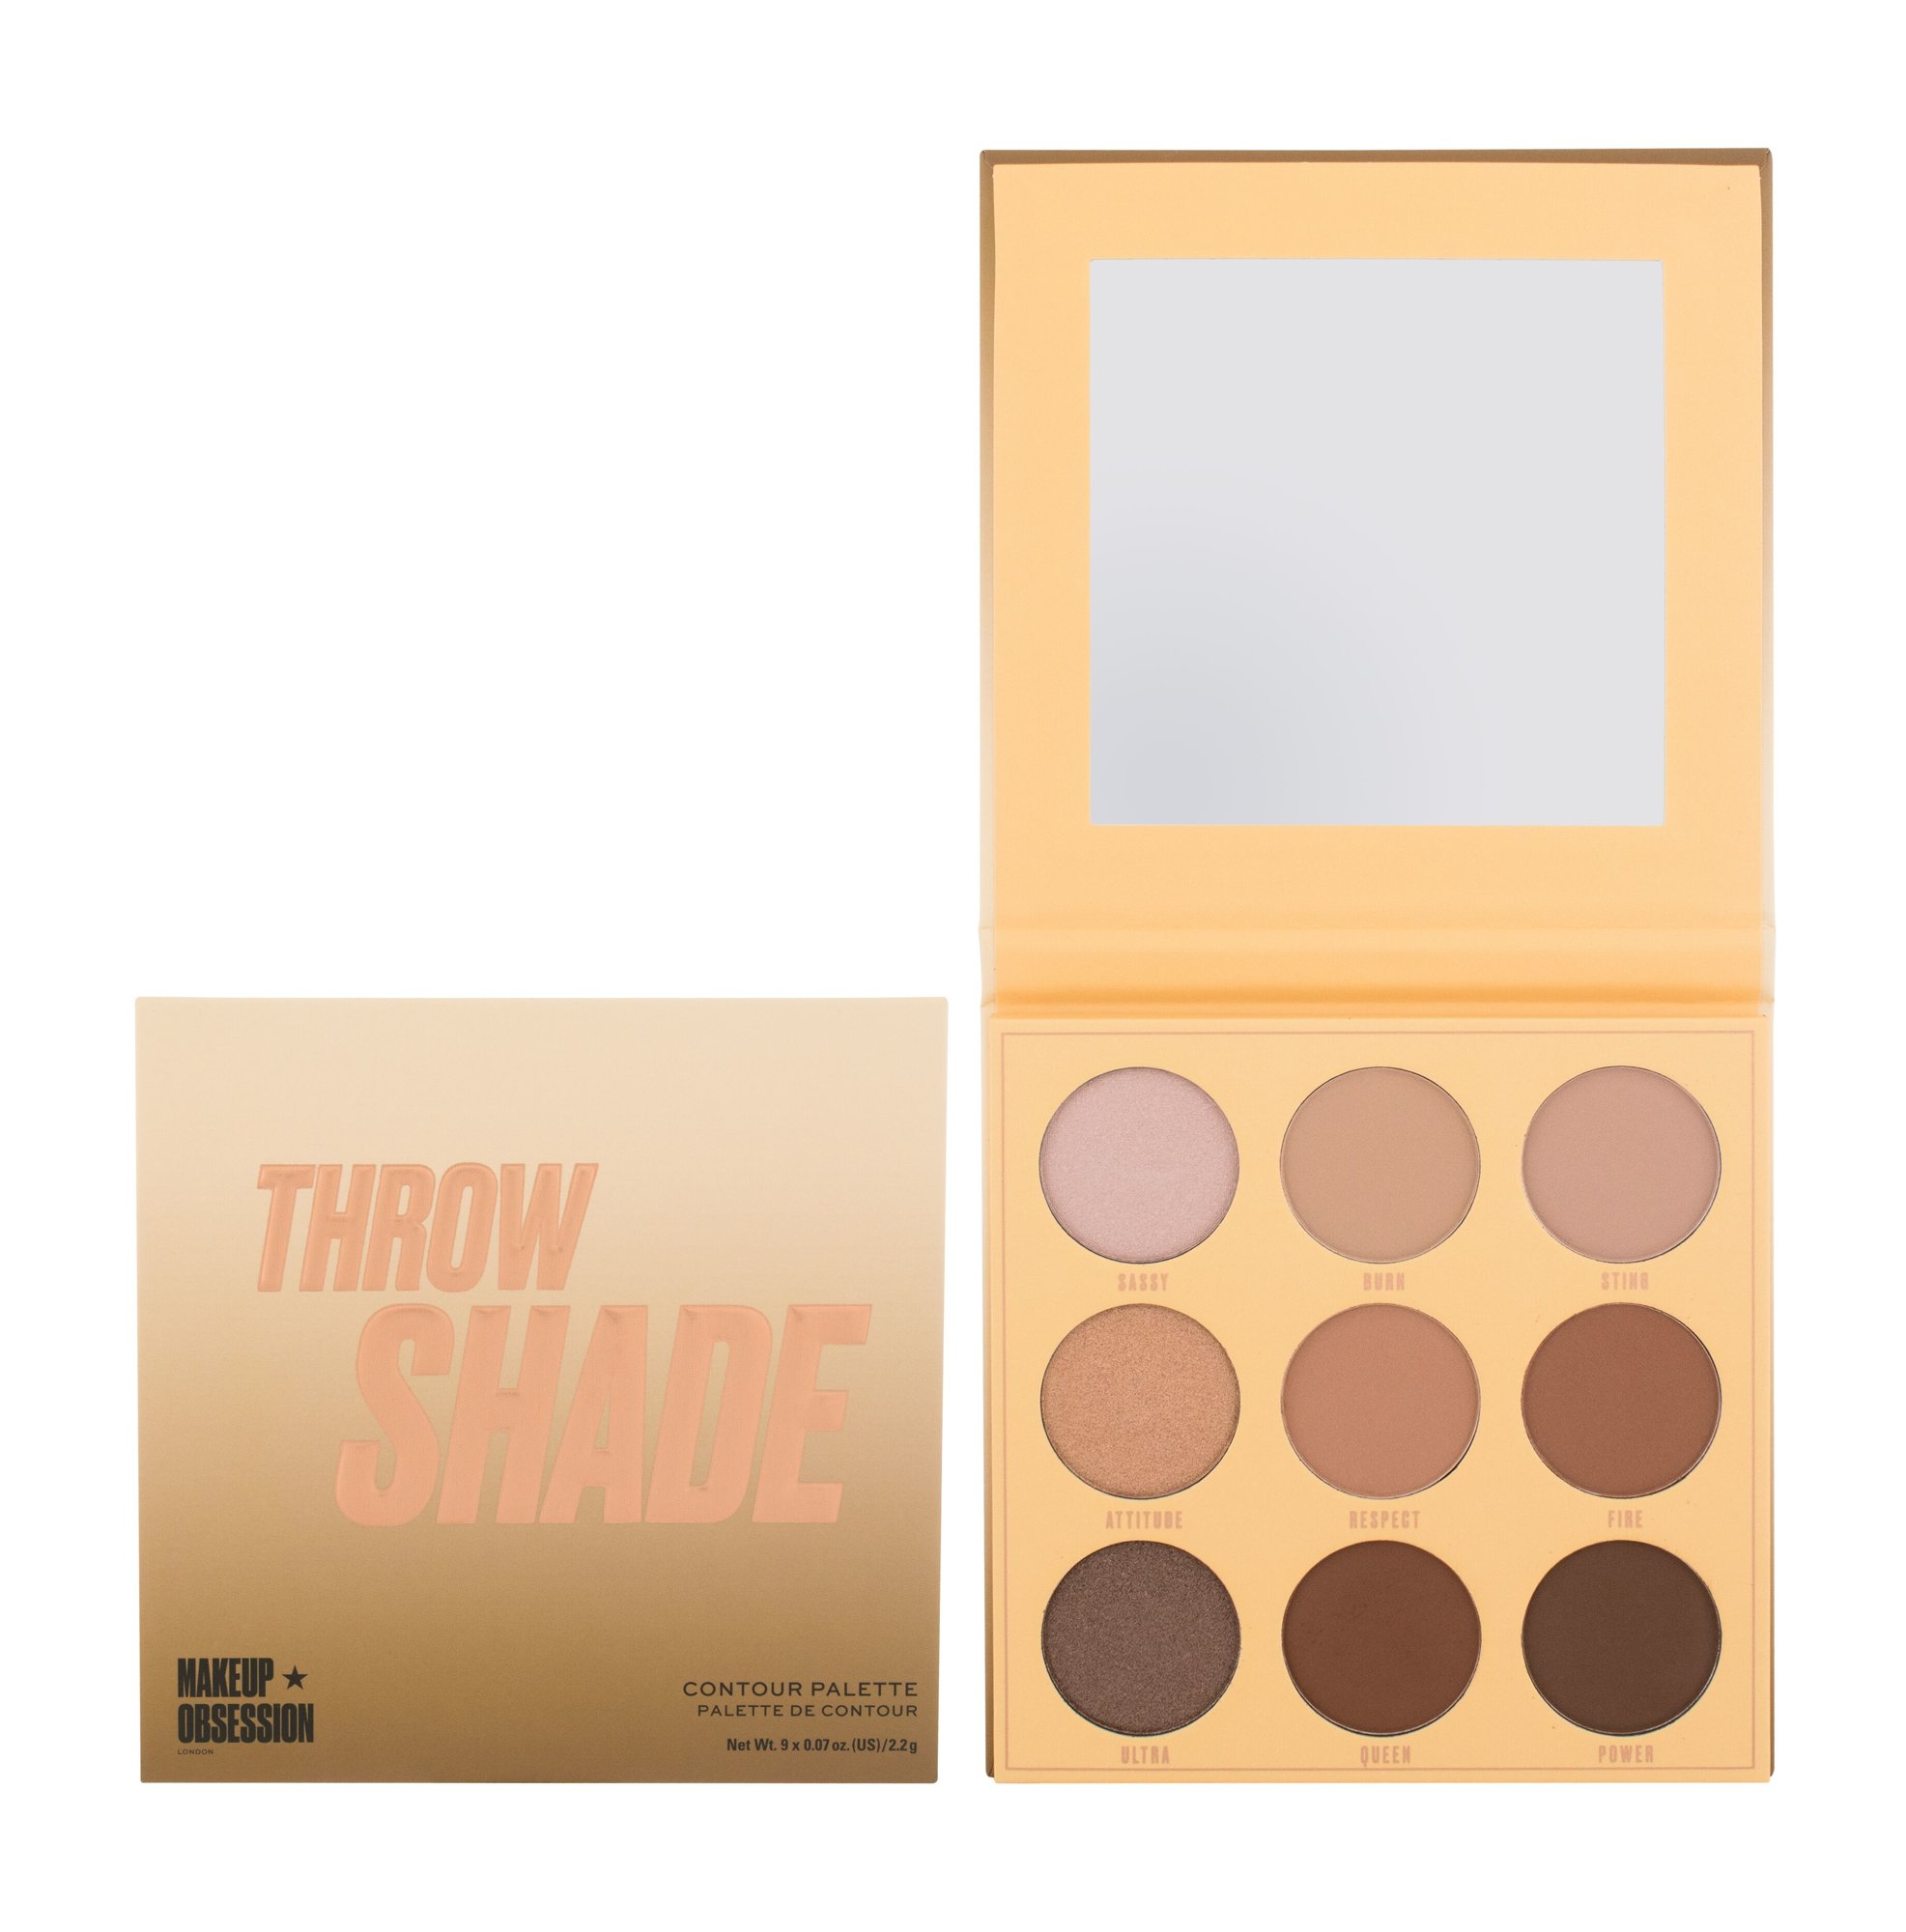 Makeup Obsession Throw Shade